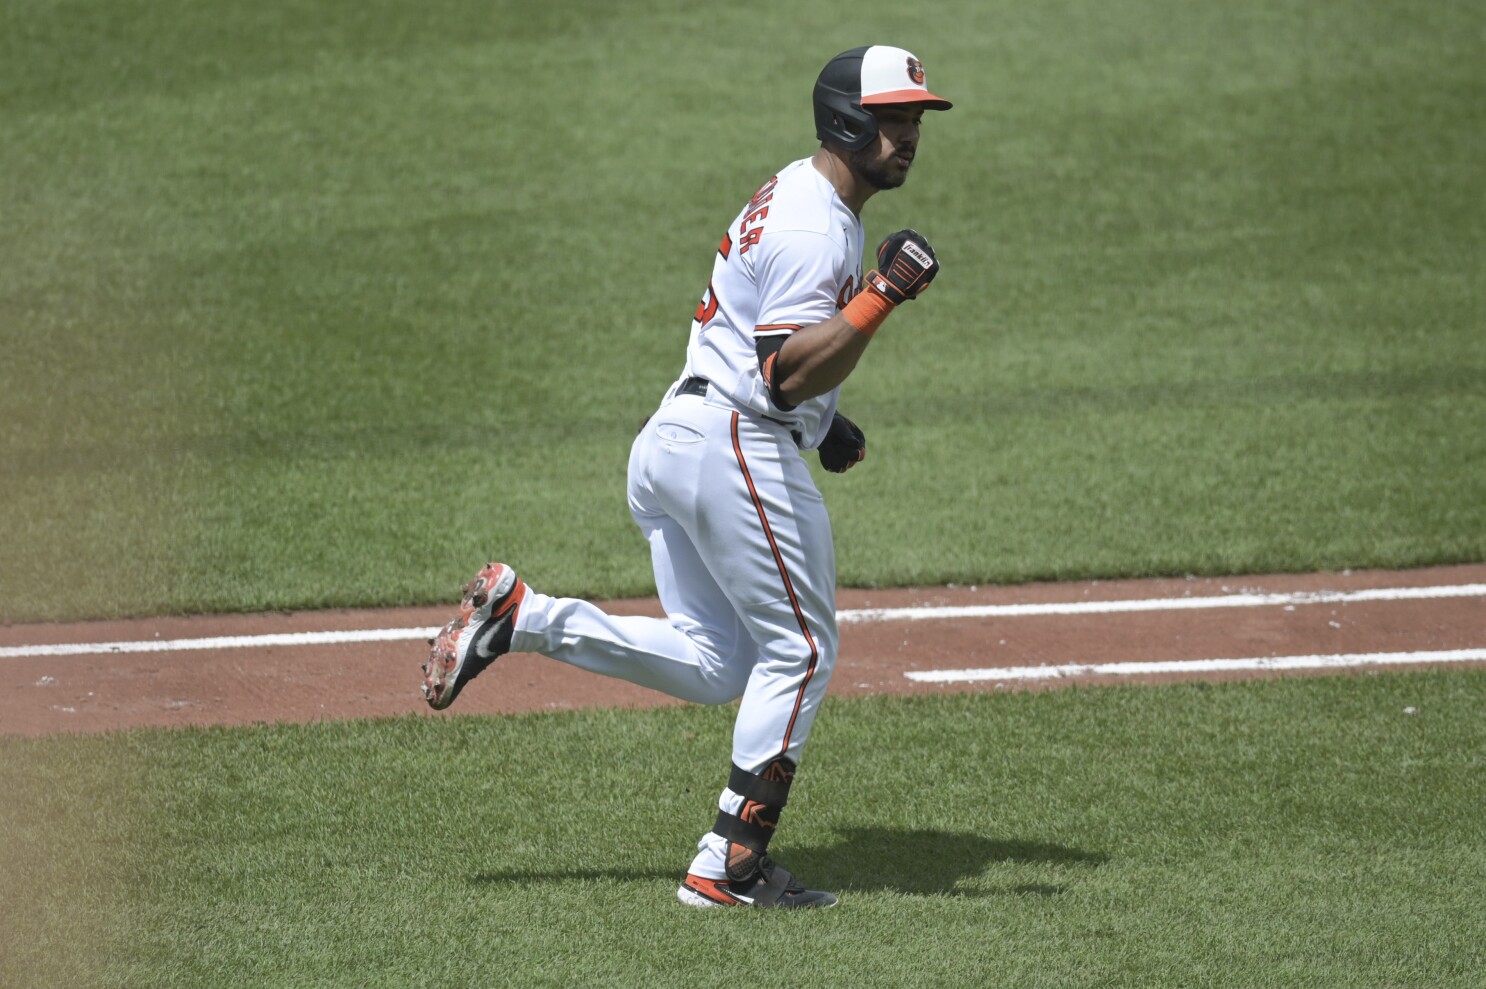 Orioles edge Rangers on Mateo's walk-off hit by pitch